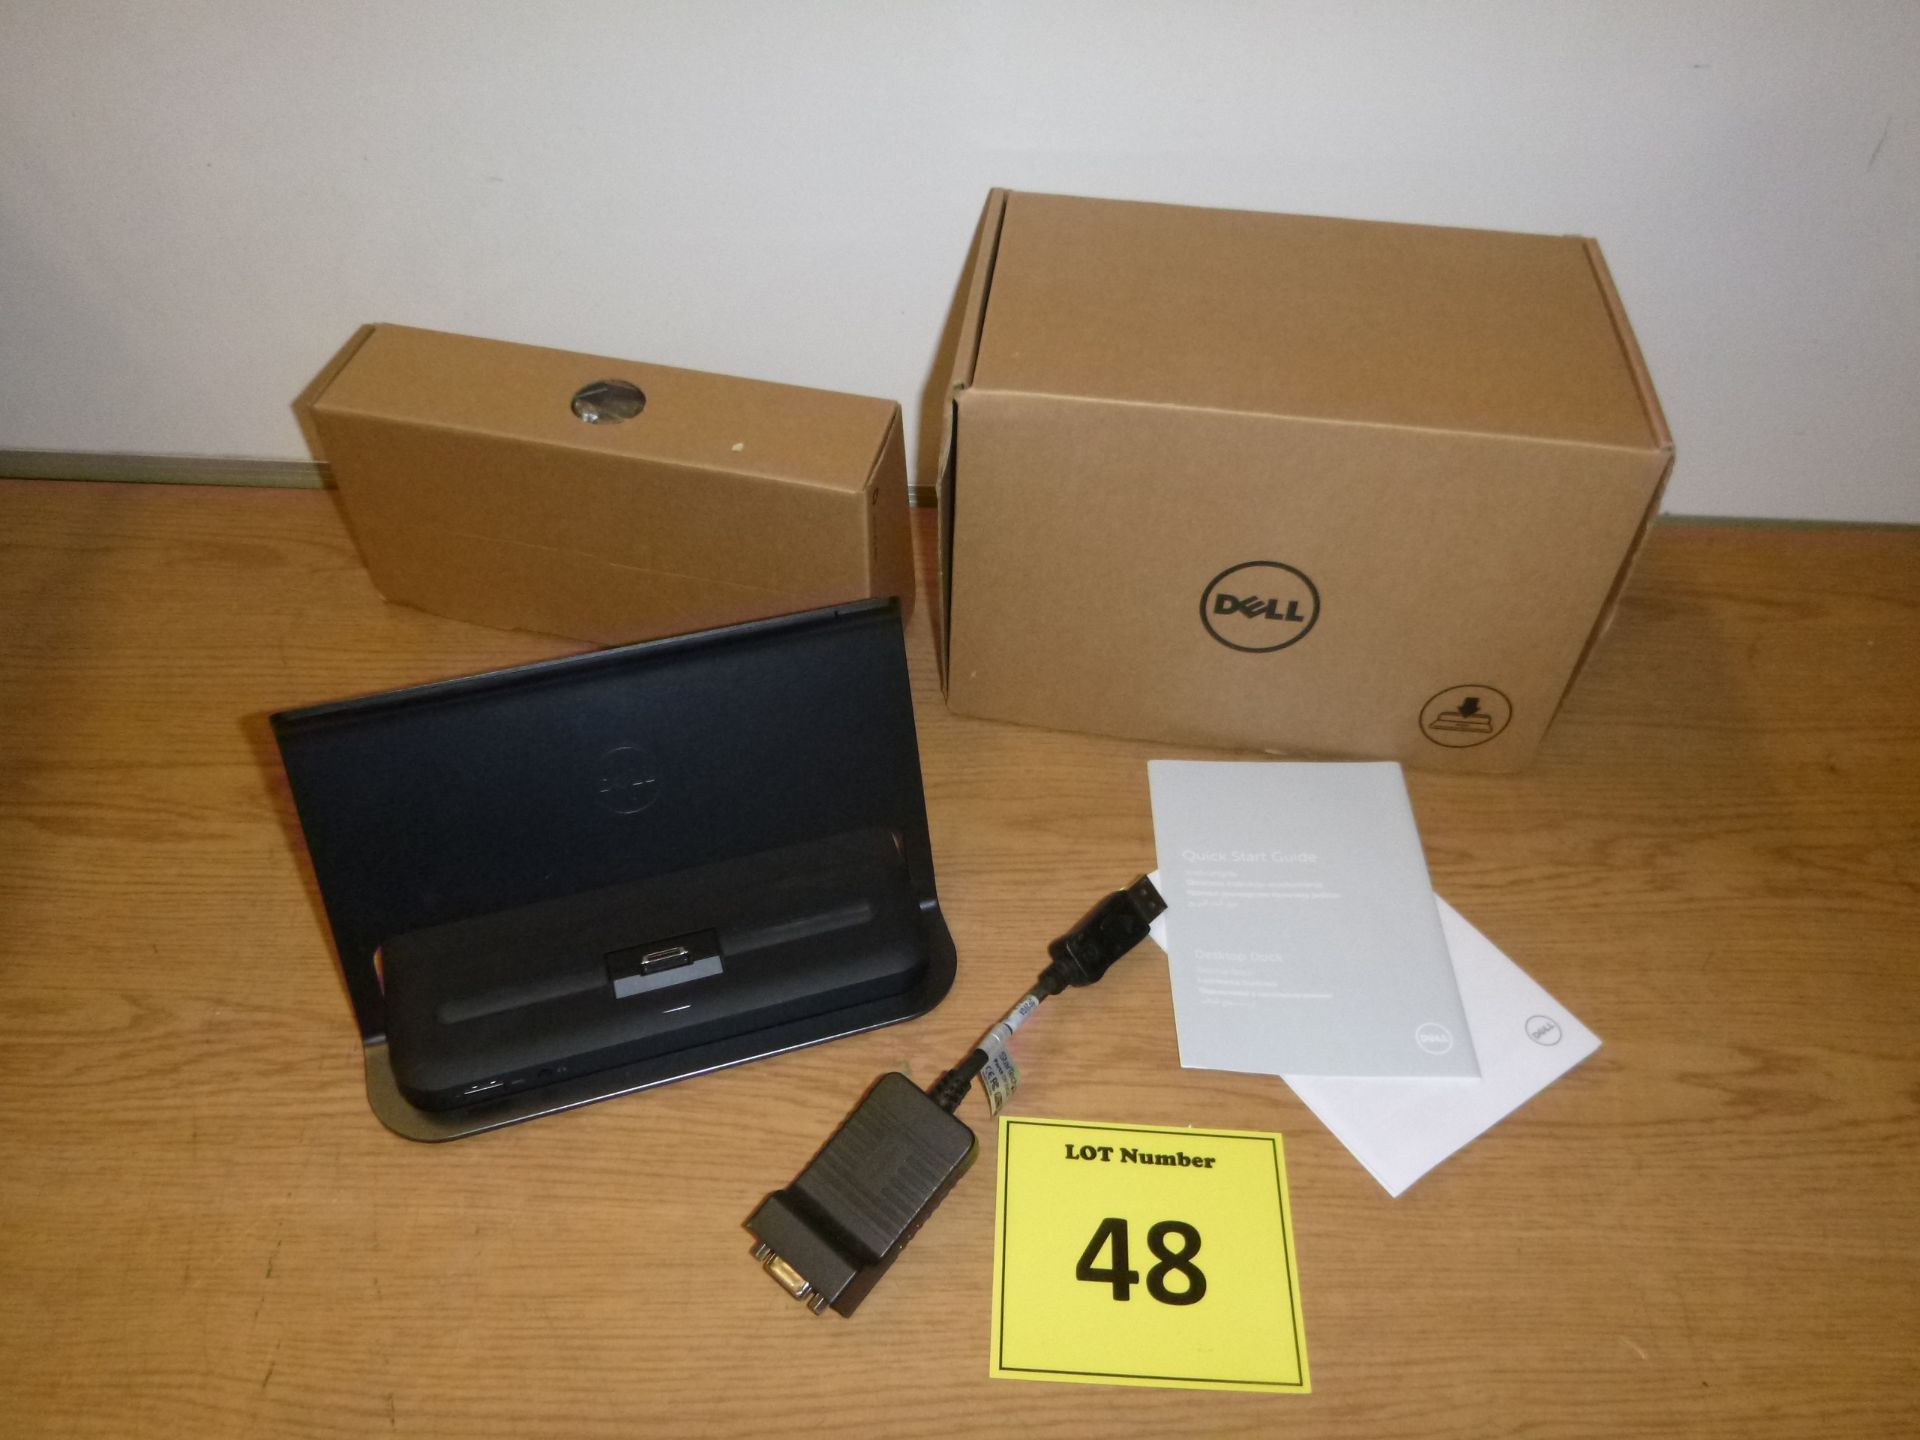 DELL DOCKING STATION K10A COMPLETE WITH PSU. BOXED